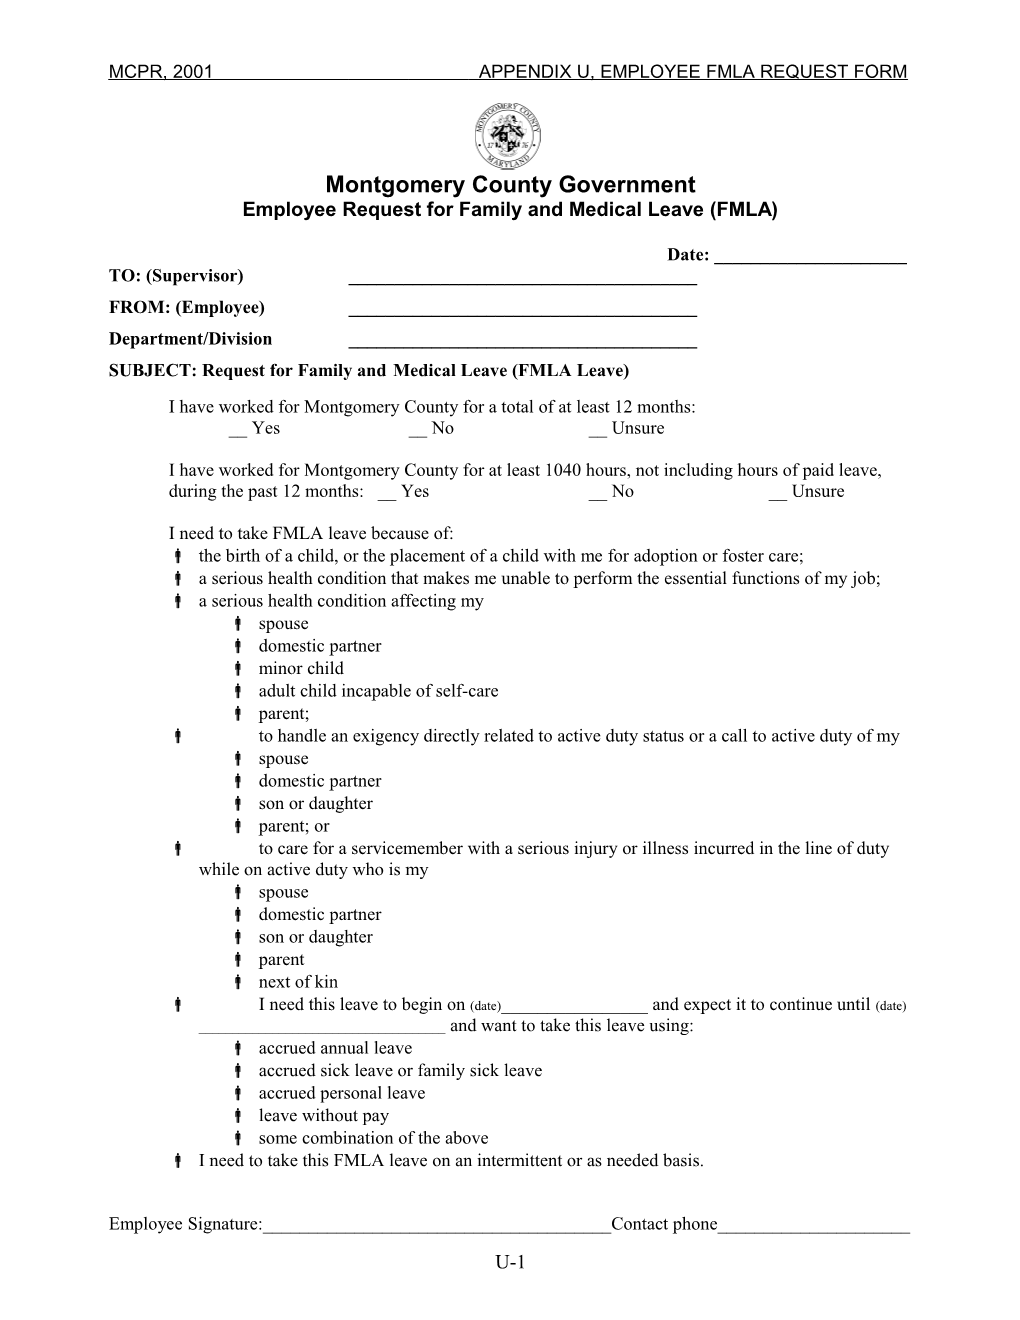 Employee Request for Family and Medical Leave (FMLA)